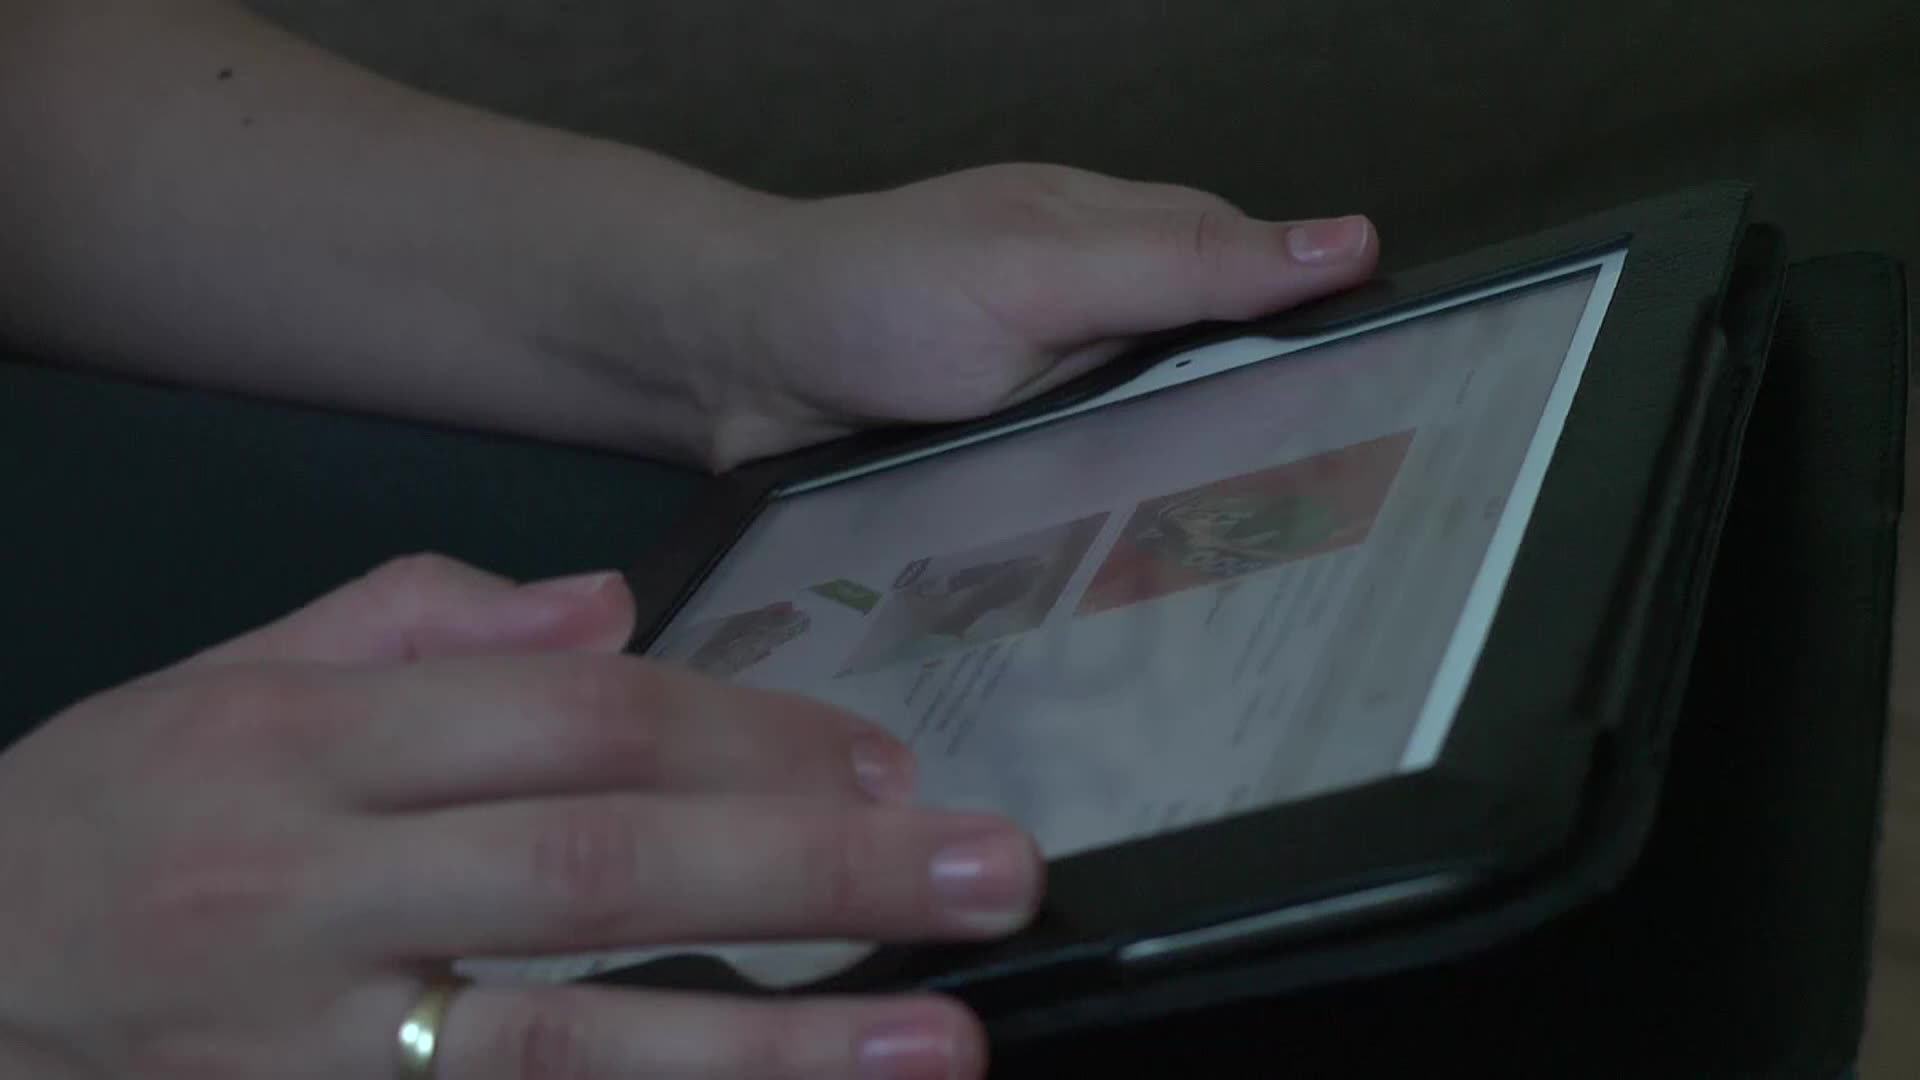 hands are holding and operating the screen of a tablet